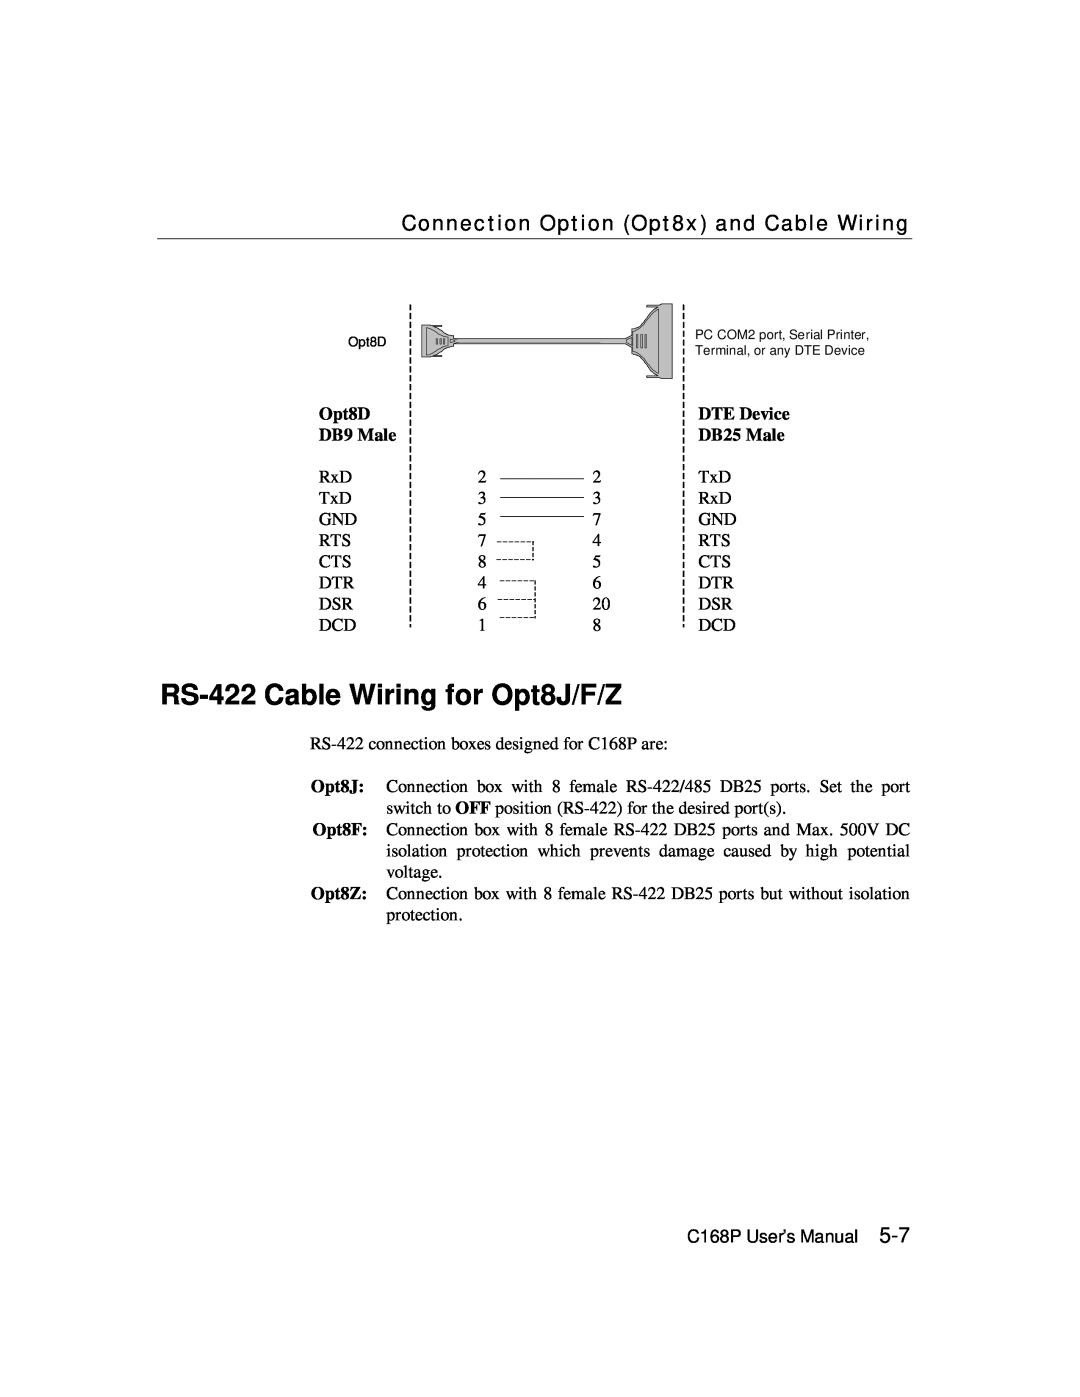 Moxa Technologies C168P user manual RS-422 Cable Wiring for Opt8J/F/Z, Connection Option Opt8x and Cable Wiring 